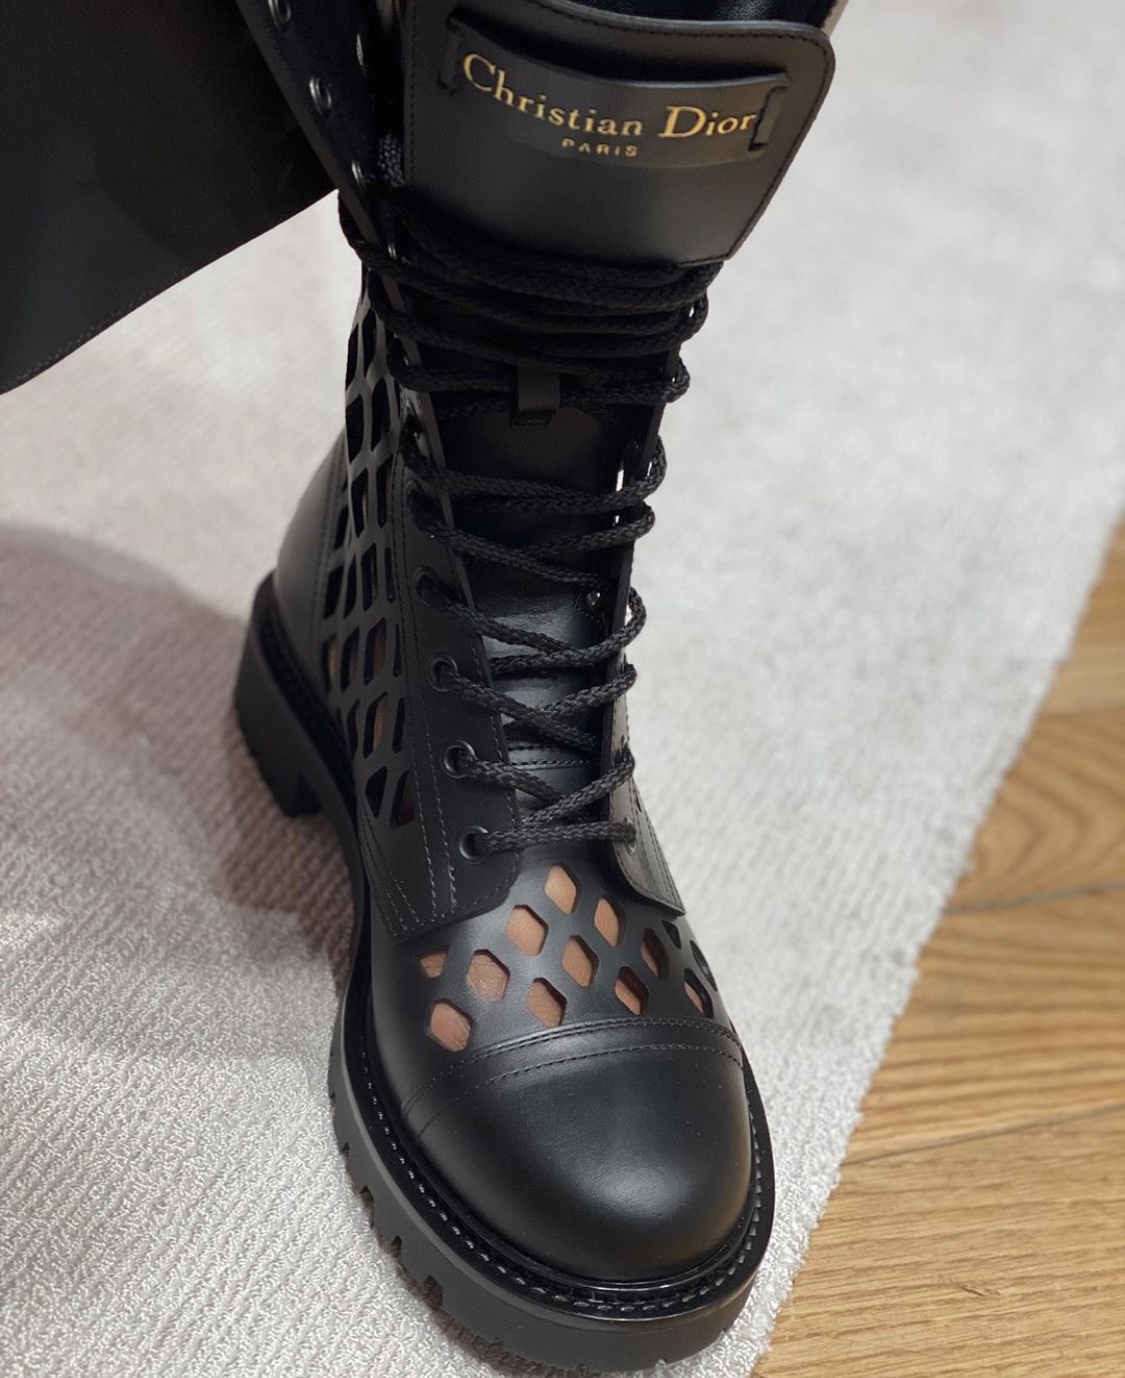 Accor for example believe Bomb Product of the Day: Fishnet Cutout D-Trap Boots by Dior